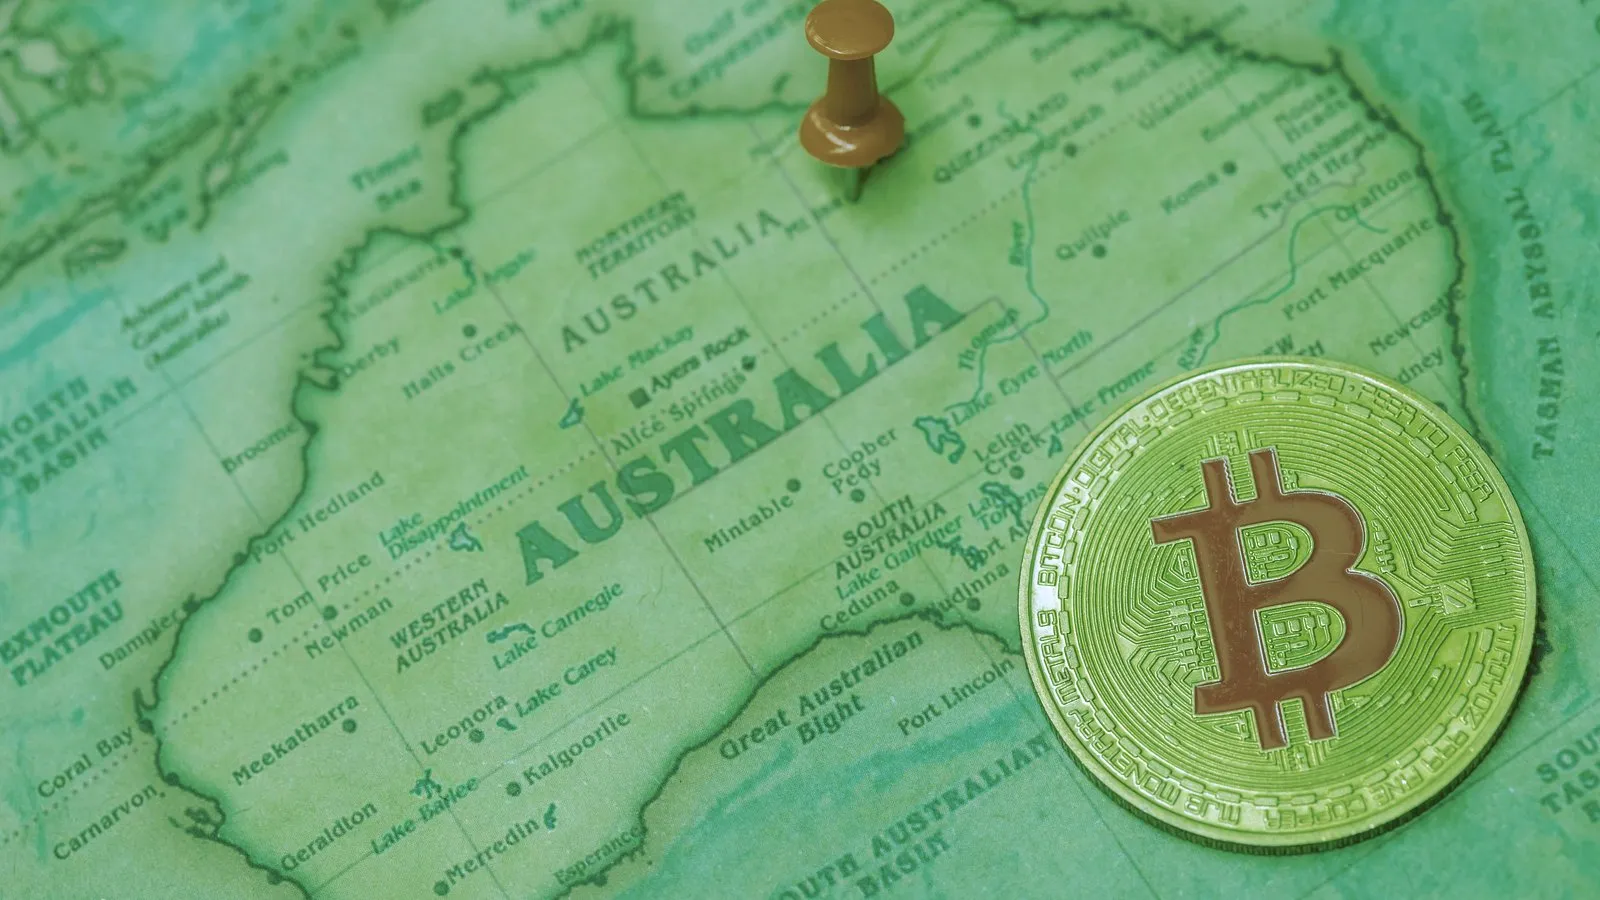 The Australian Tax Office (ATO) is highly-aware of cryptocurrency activity. Image: Shutterstock